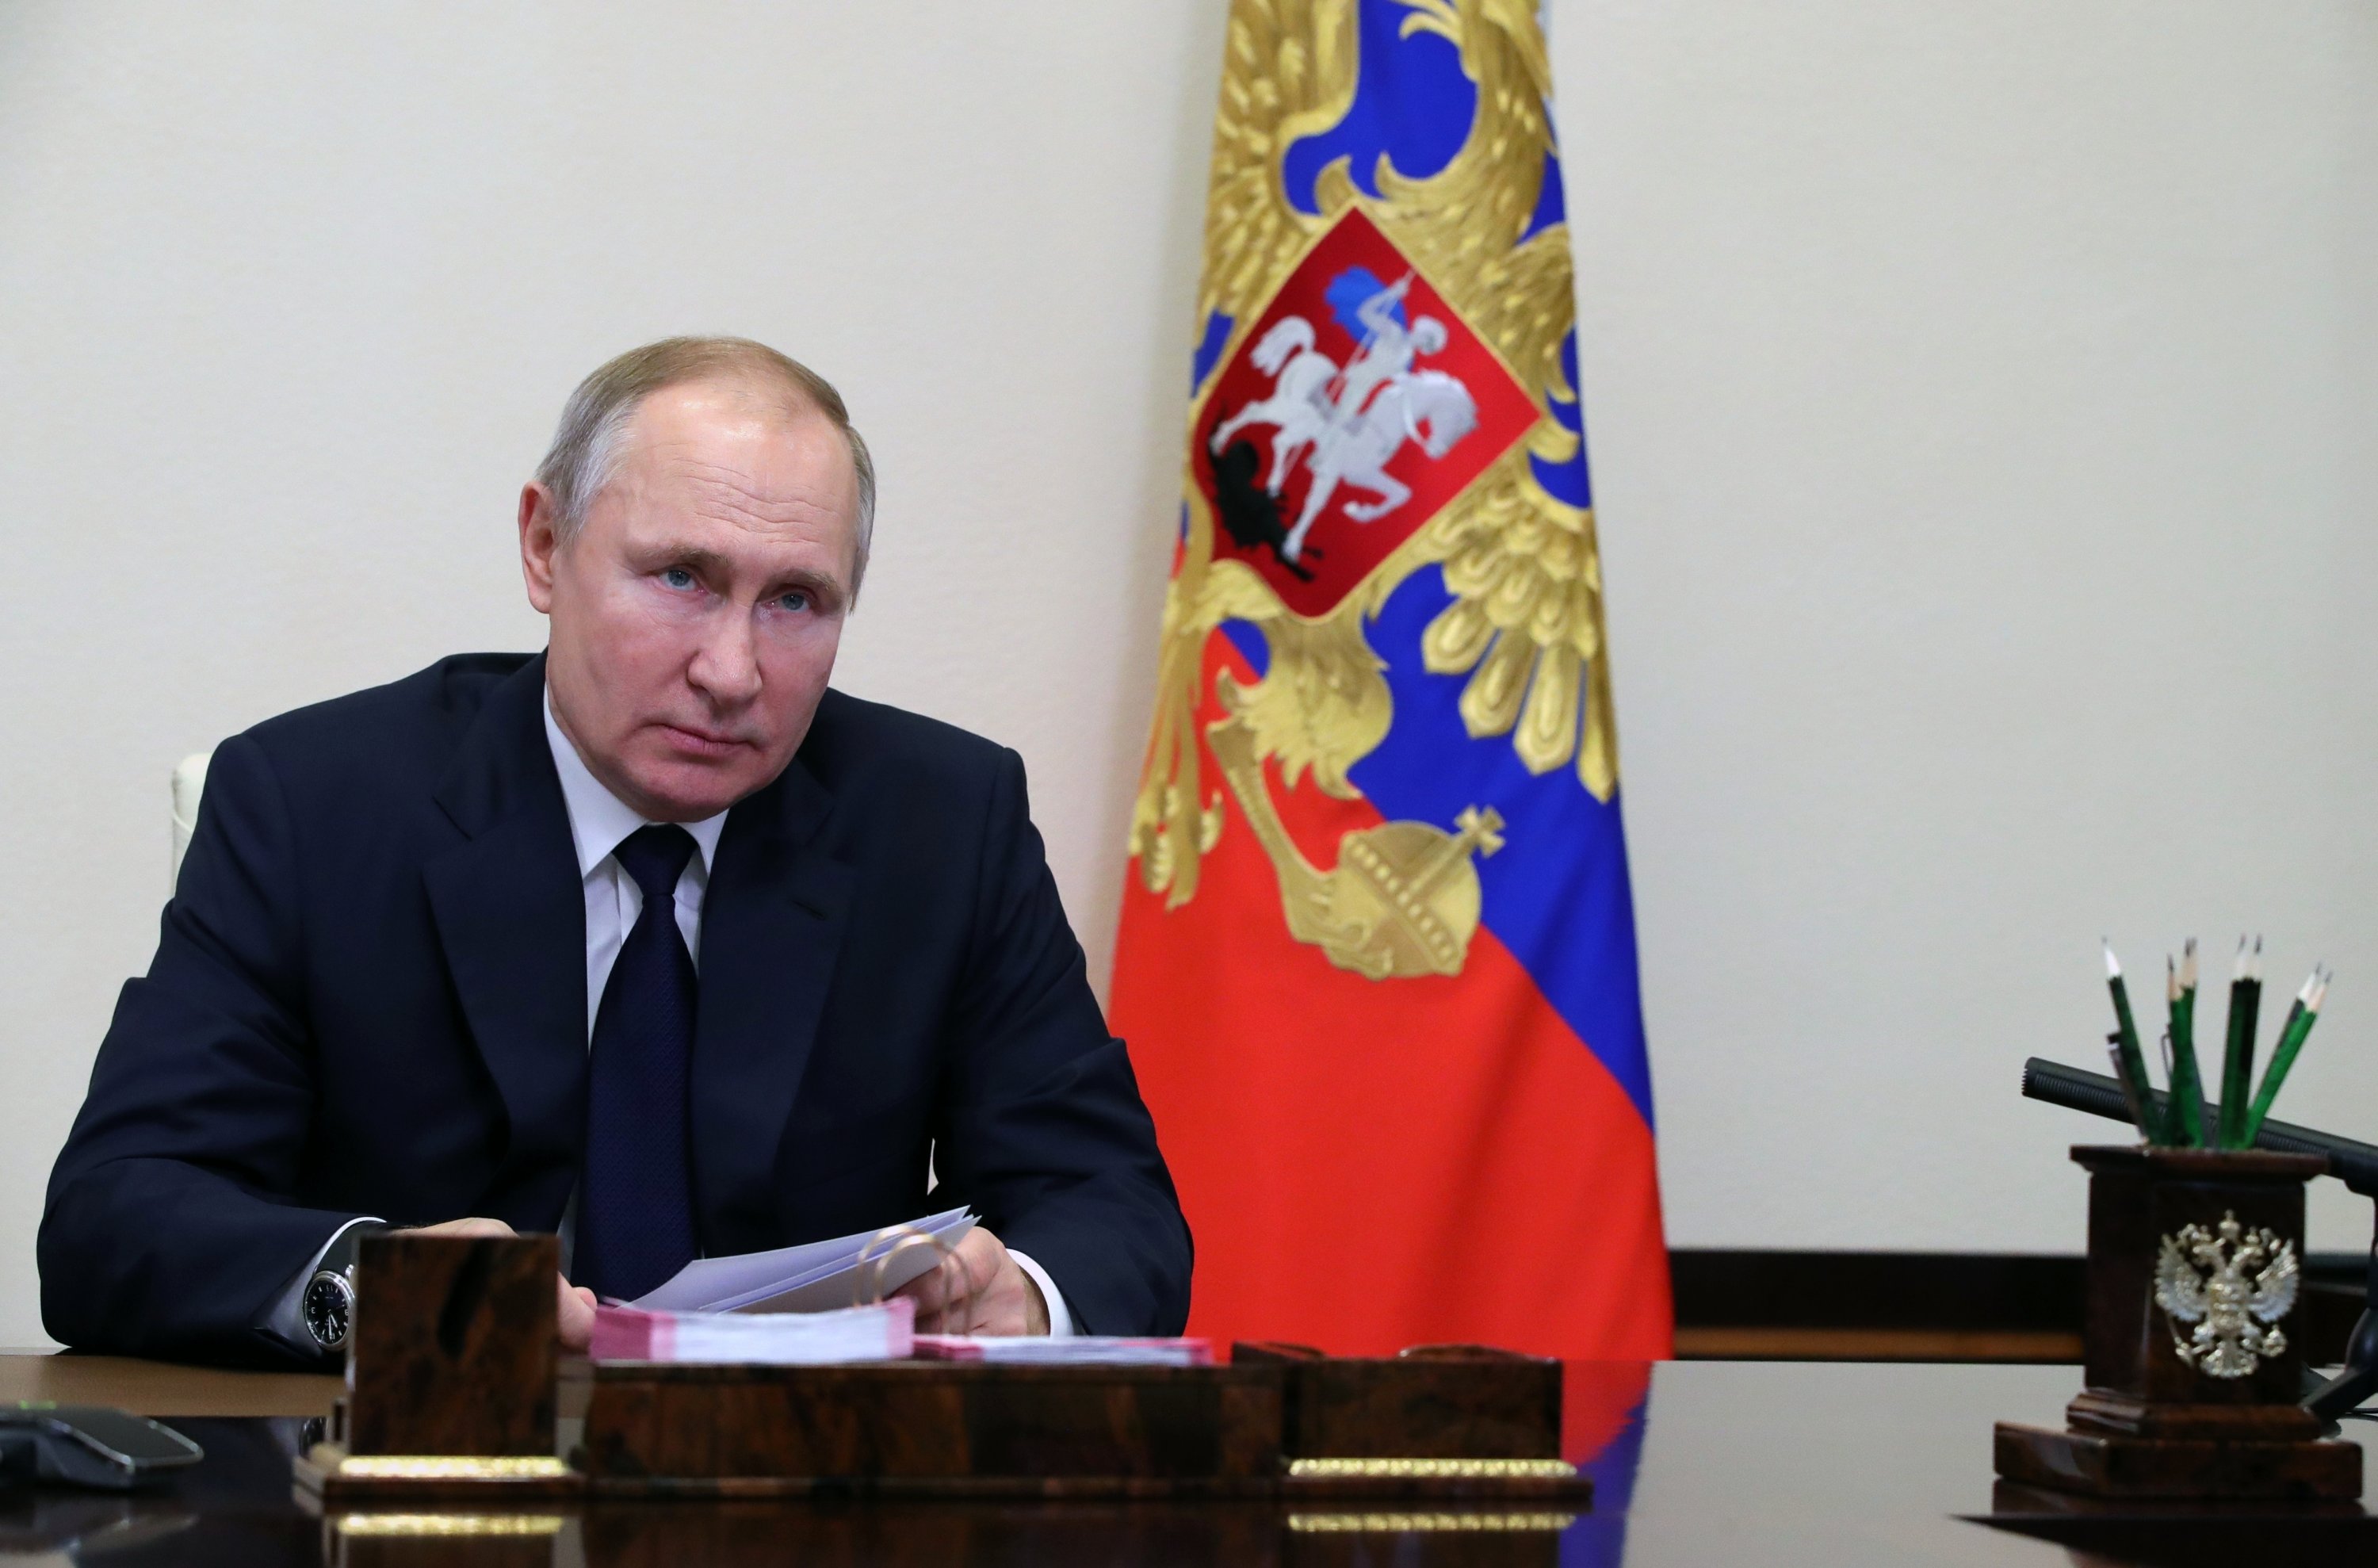 Putin warns against foreign interference in parliamentary elections